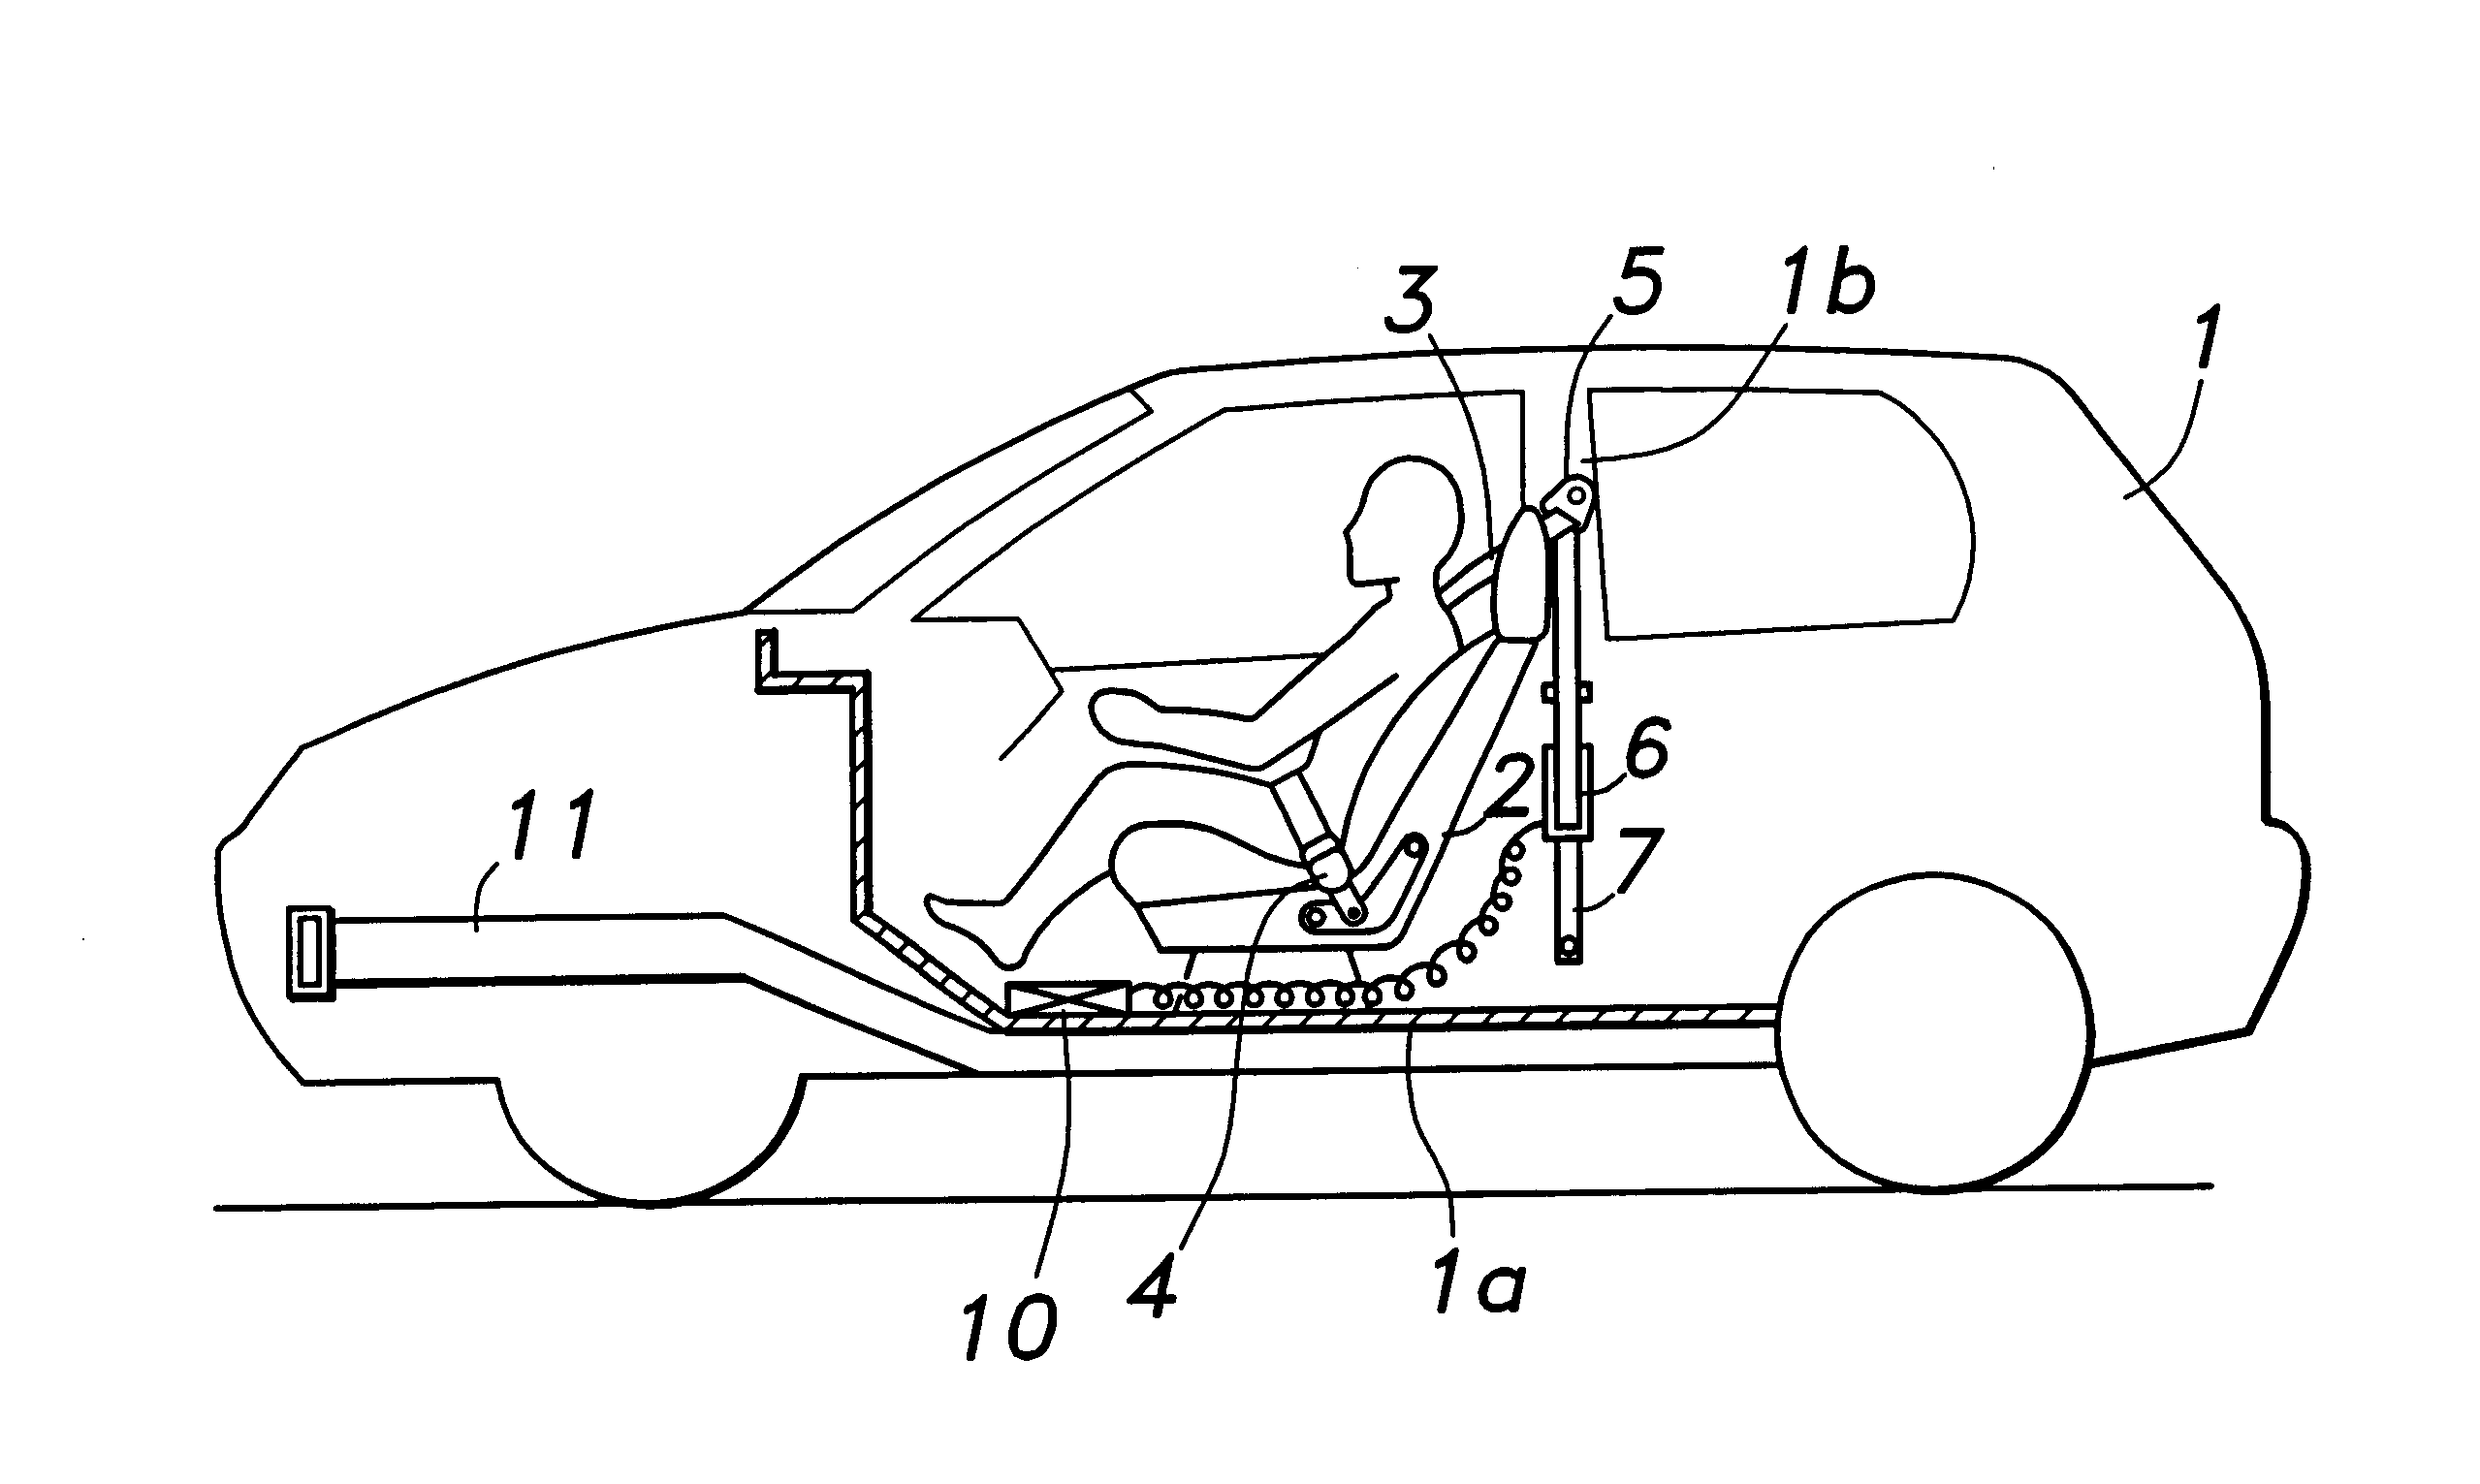 Automotive vehicle occupant protection system